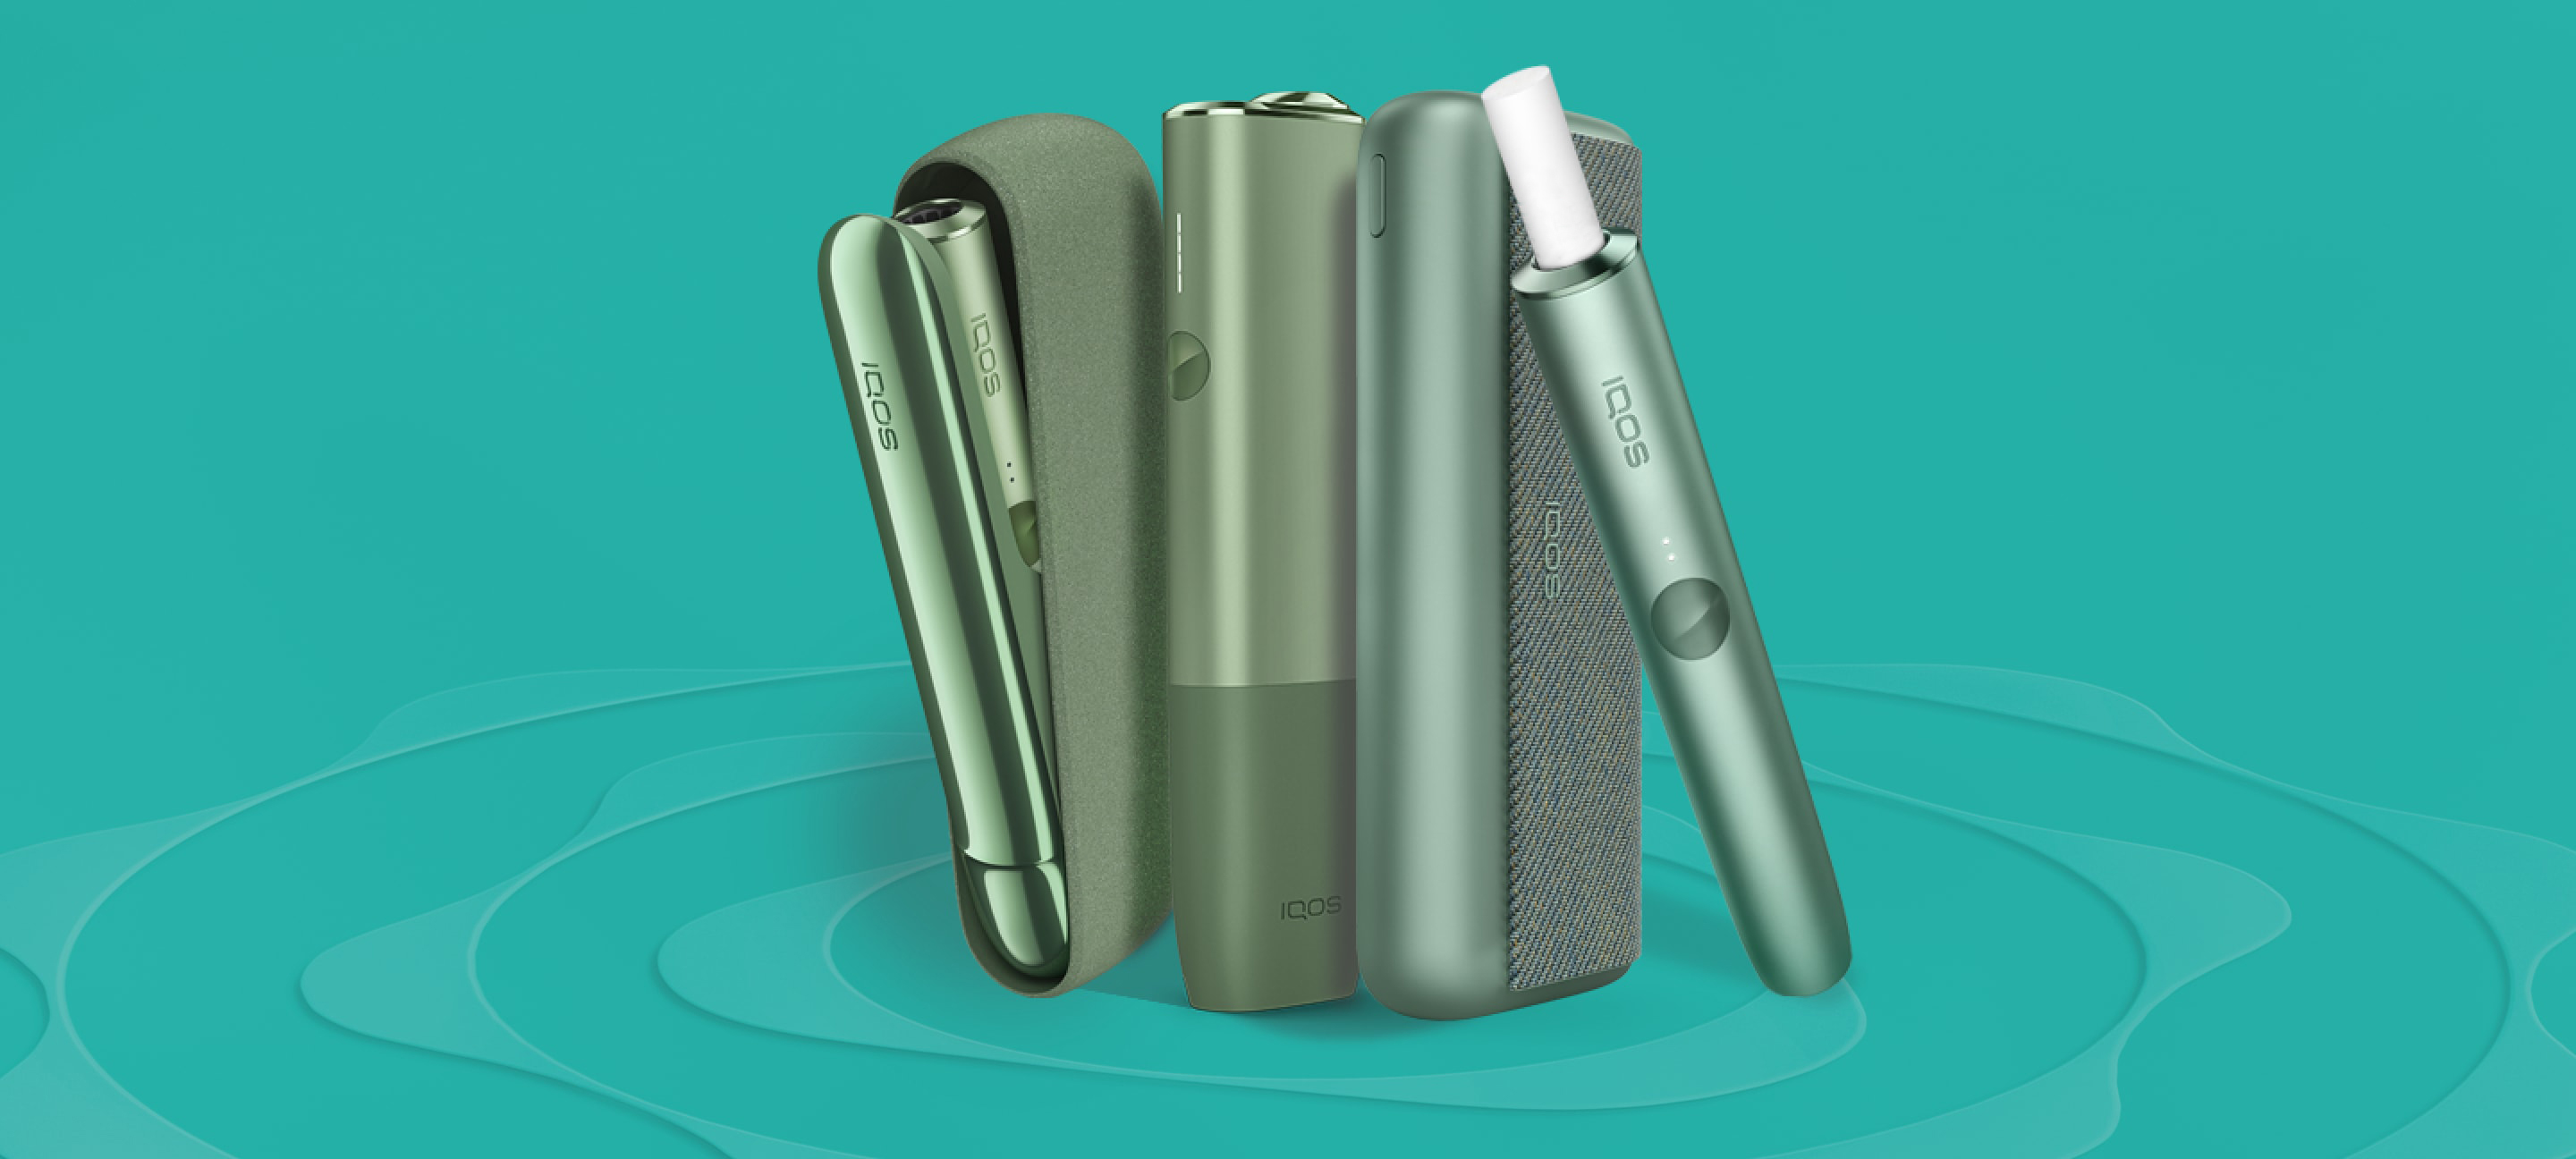 2FIRSTS  IQOS ILUMA BRIGHT: Limited Edition for Smoke-free Society